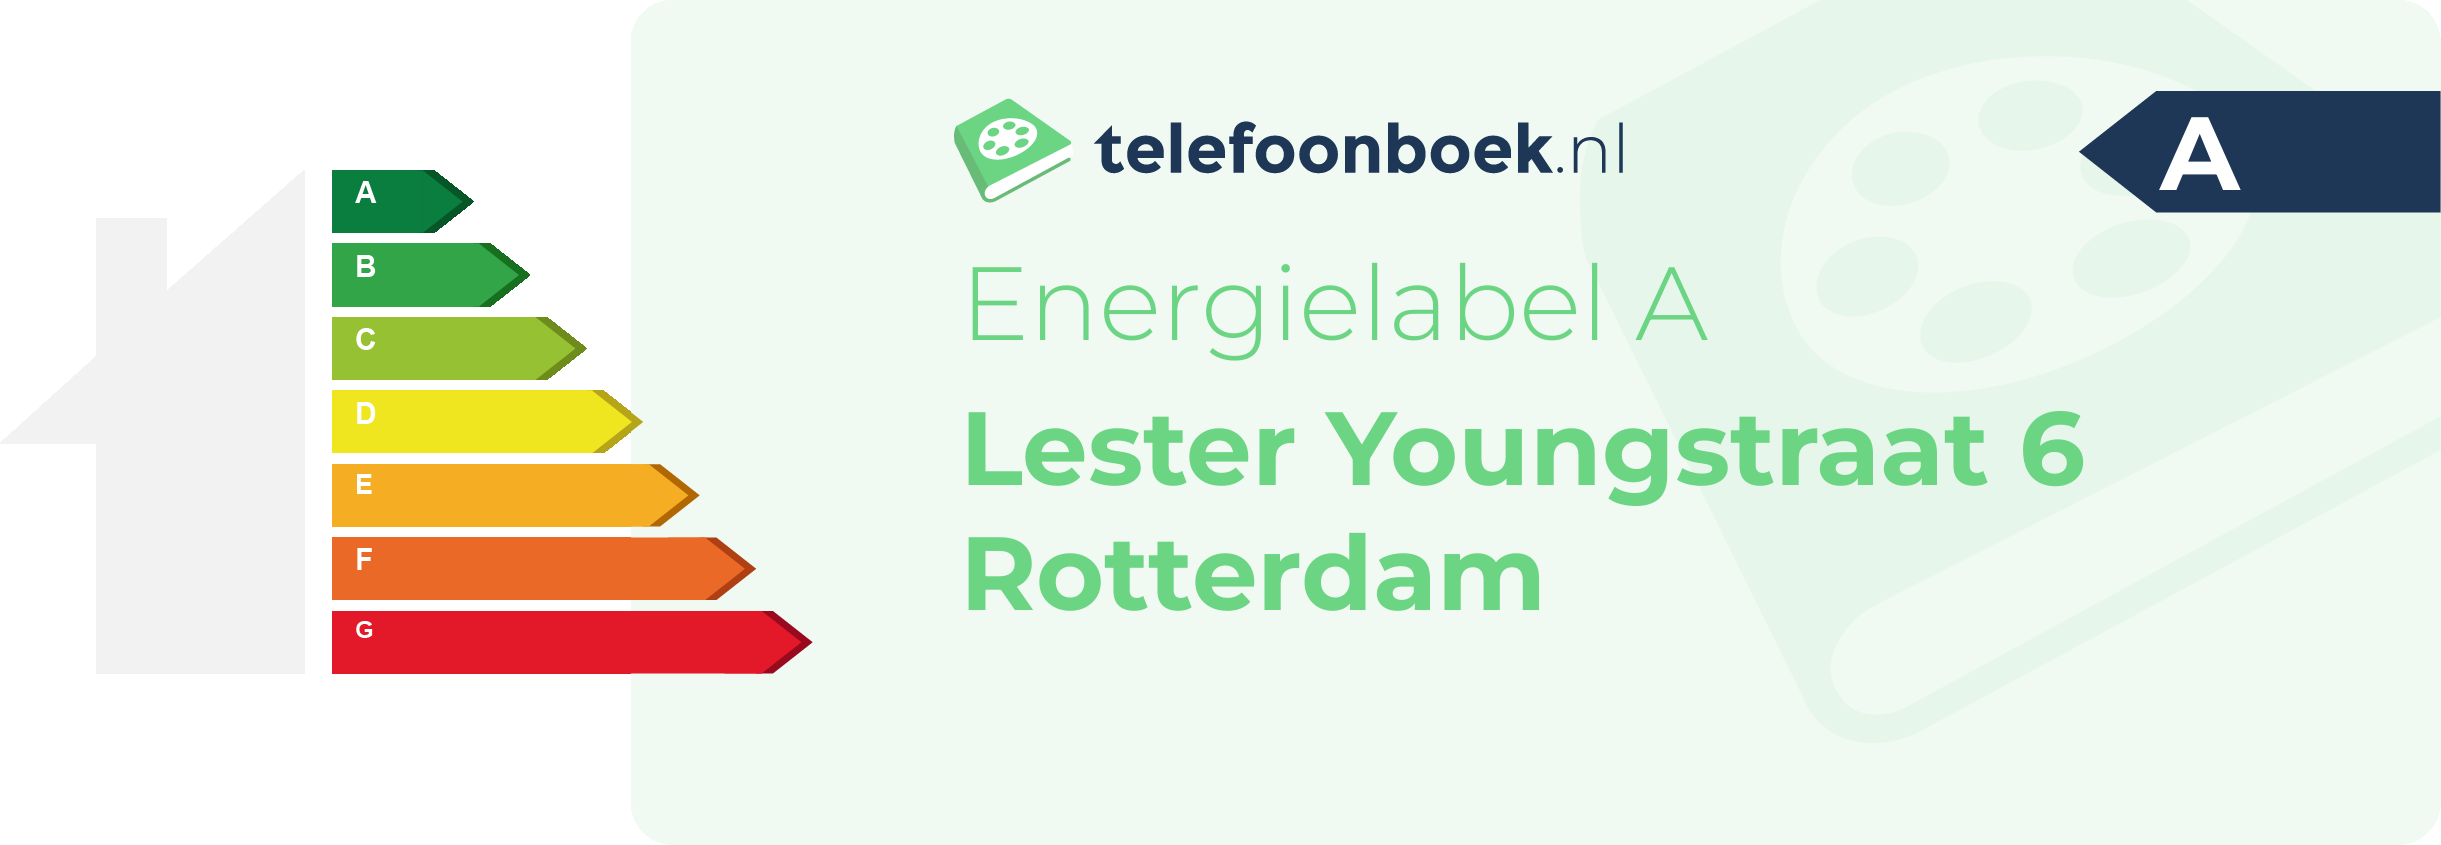 Energielabel Lester Youngstraat 6 Rotterdam